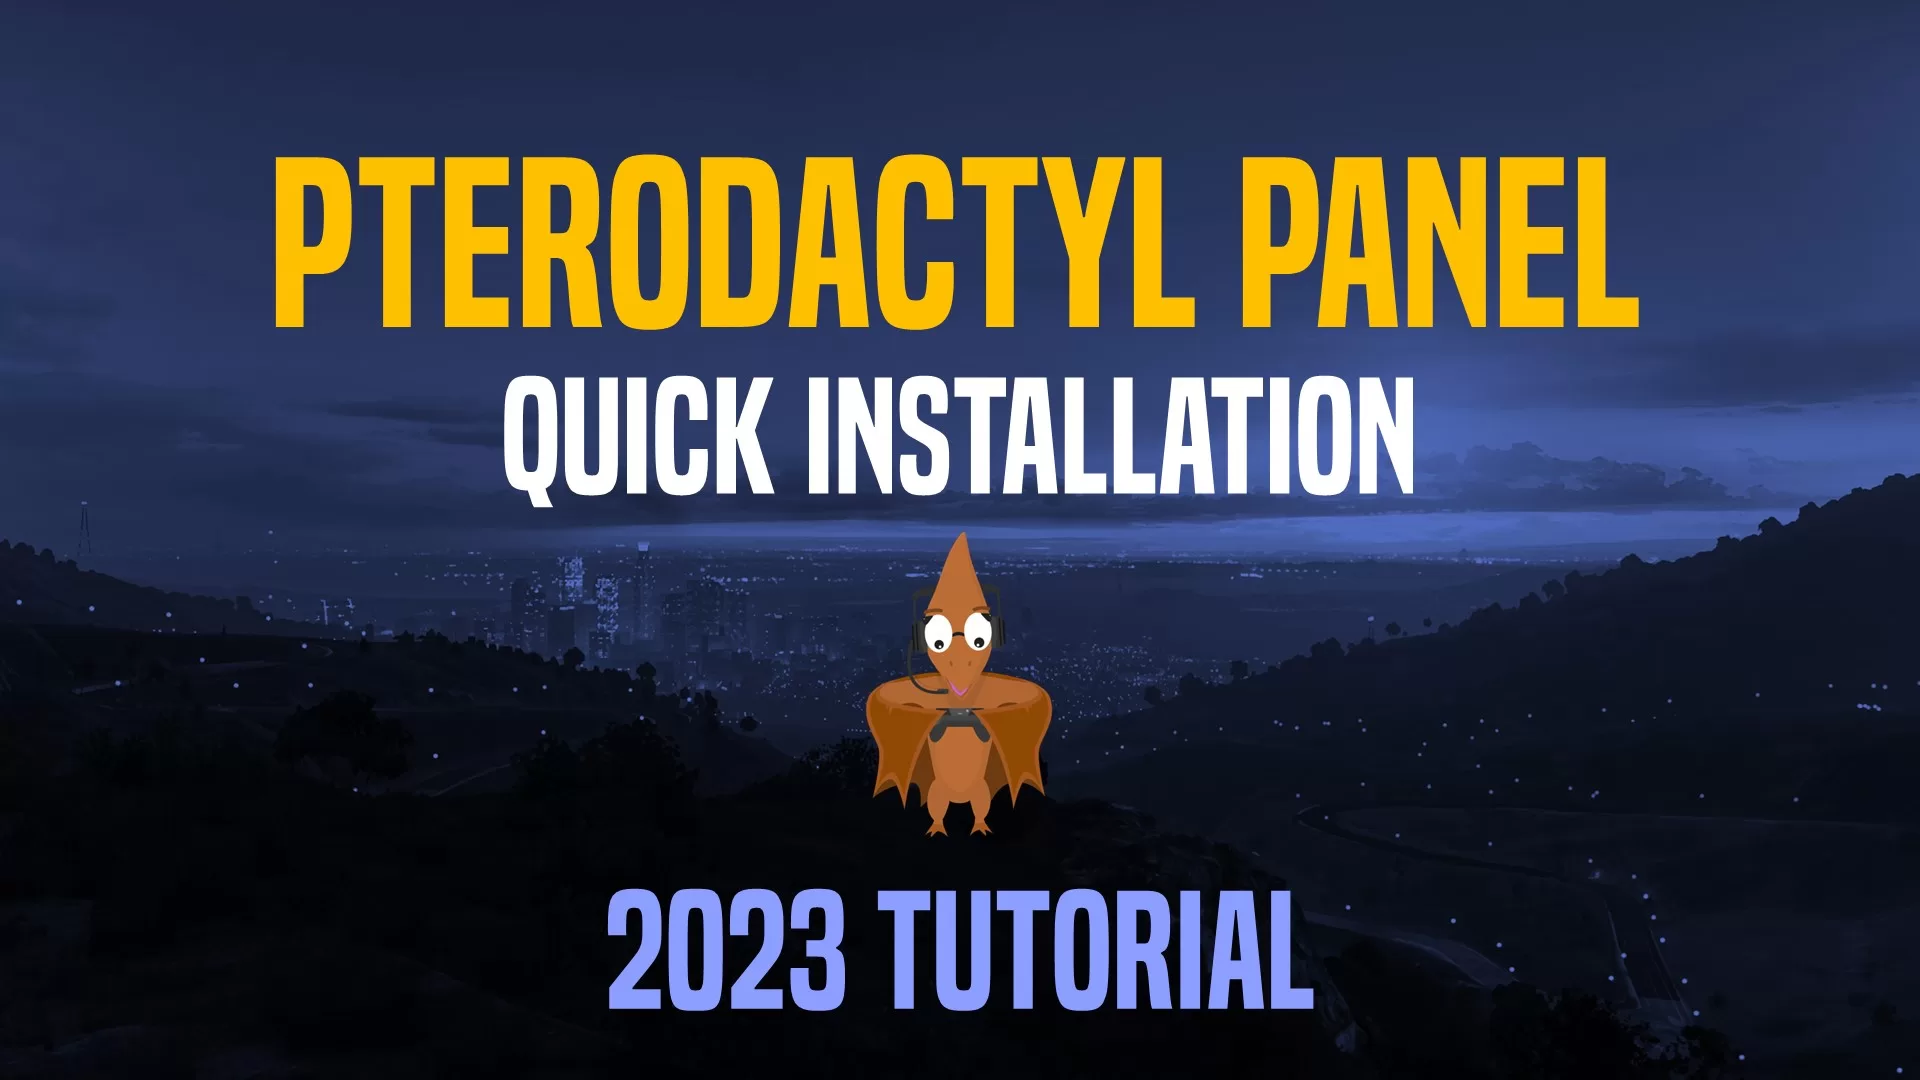 TUTORIAL : HOW TO INSTALL PTERODACTYL PANEL AND WINGS ON LINUX OS LESS THAN  10 MINUTES 